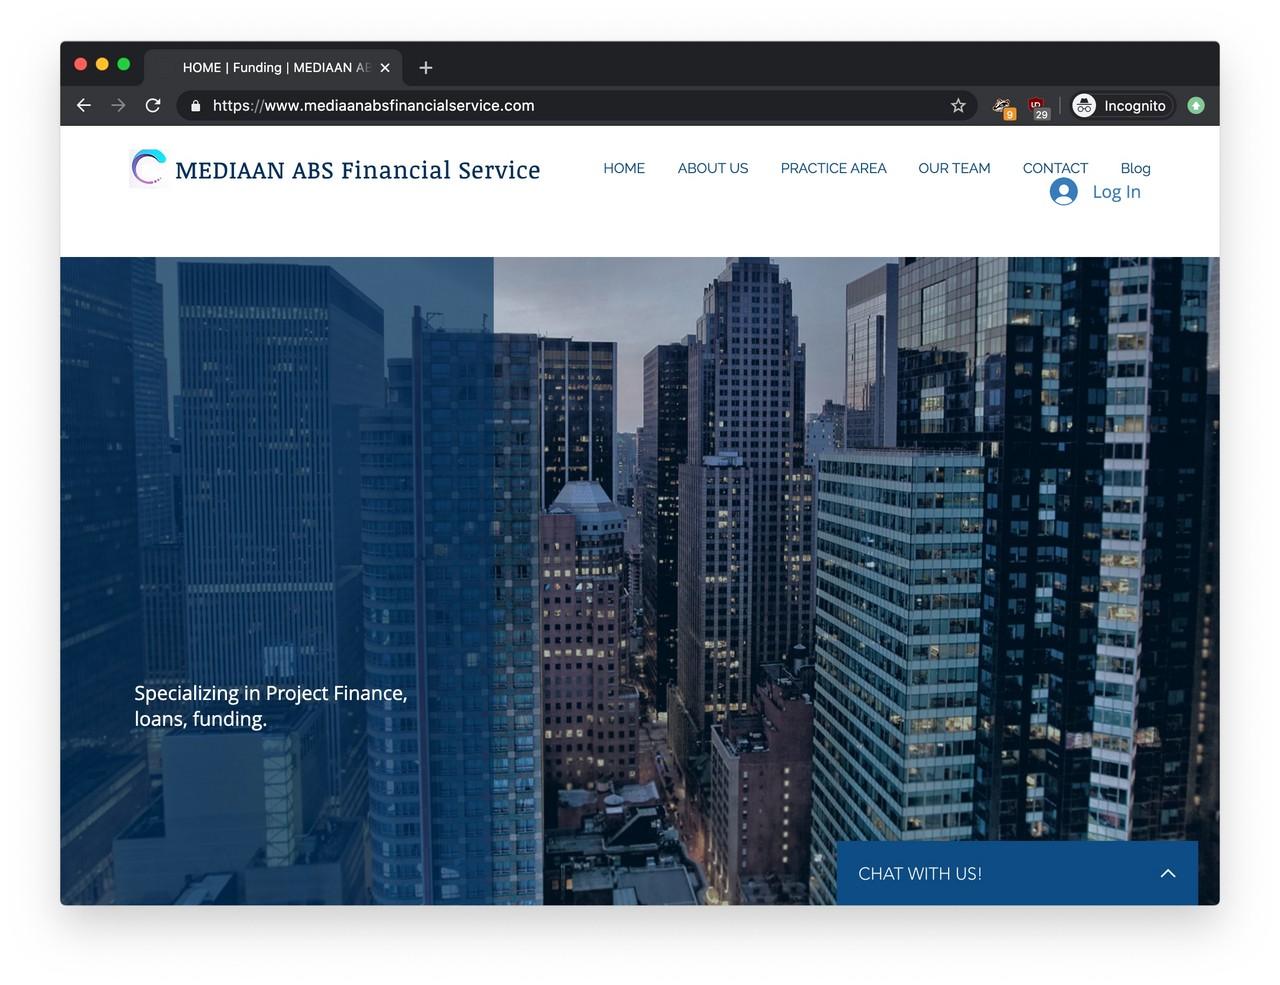 MEDIAAN ABS Financial Services homepage.